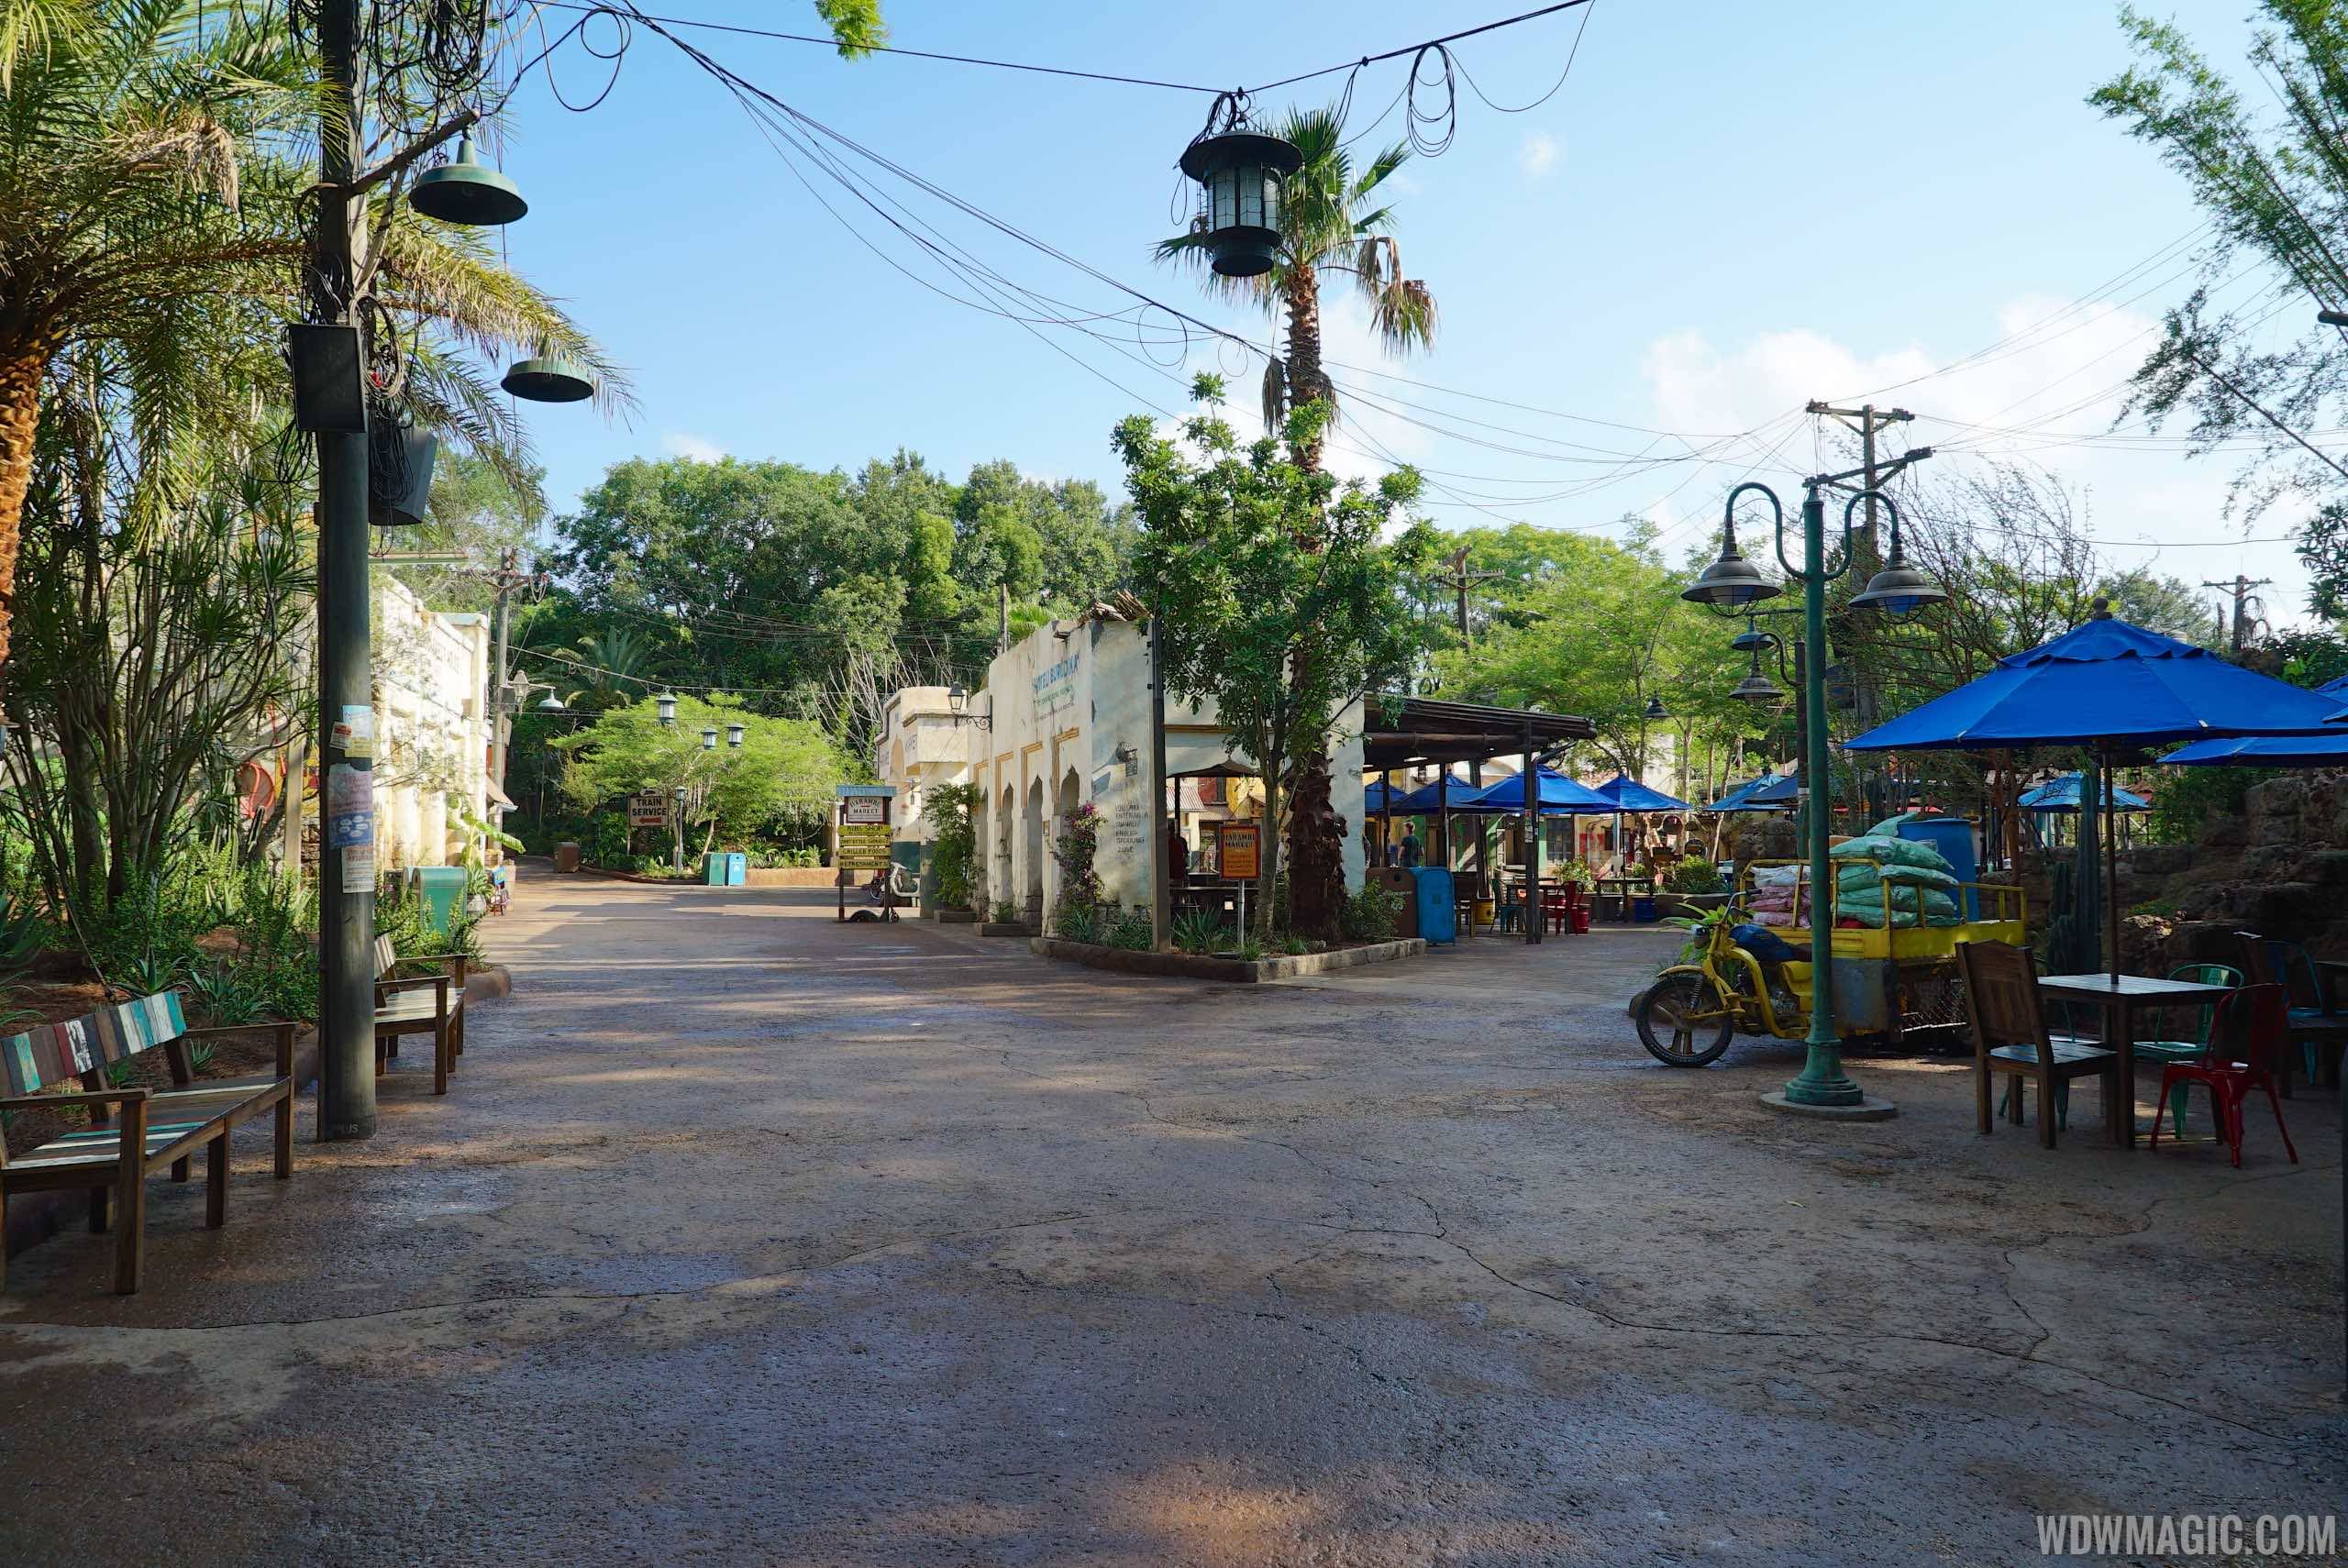 Harambe Market - View from the Asia entrance